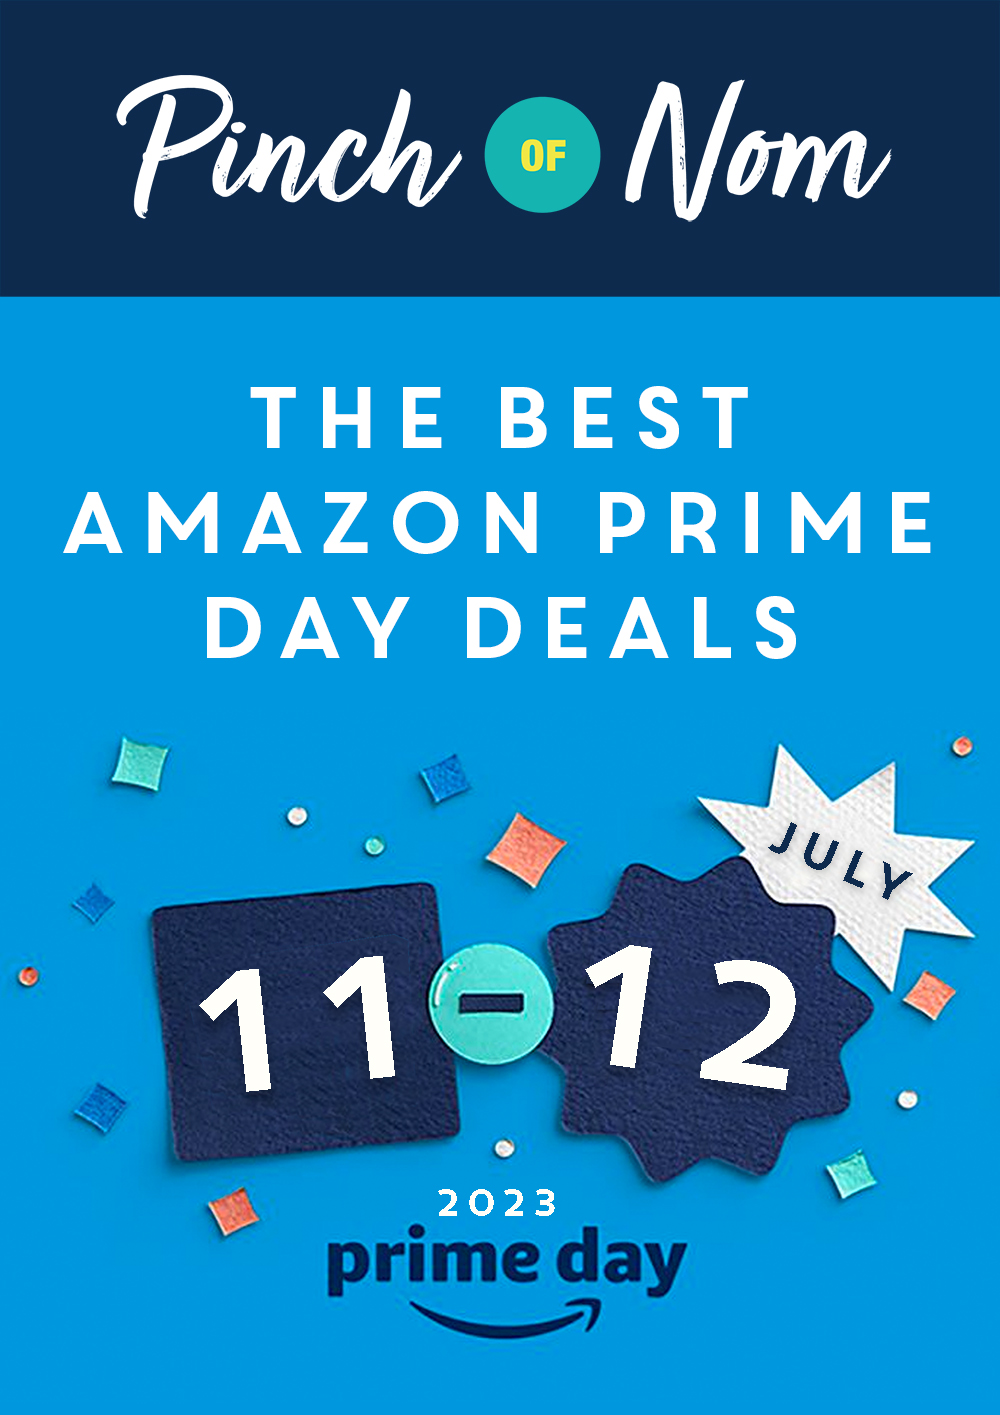 The Best Amazon Prime Day Deals - Pinch of Nom